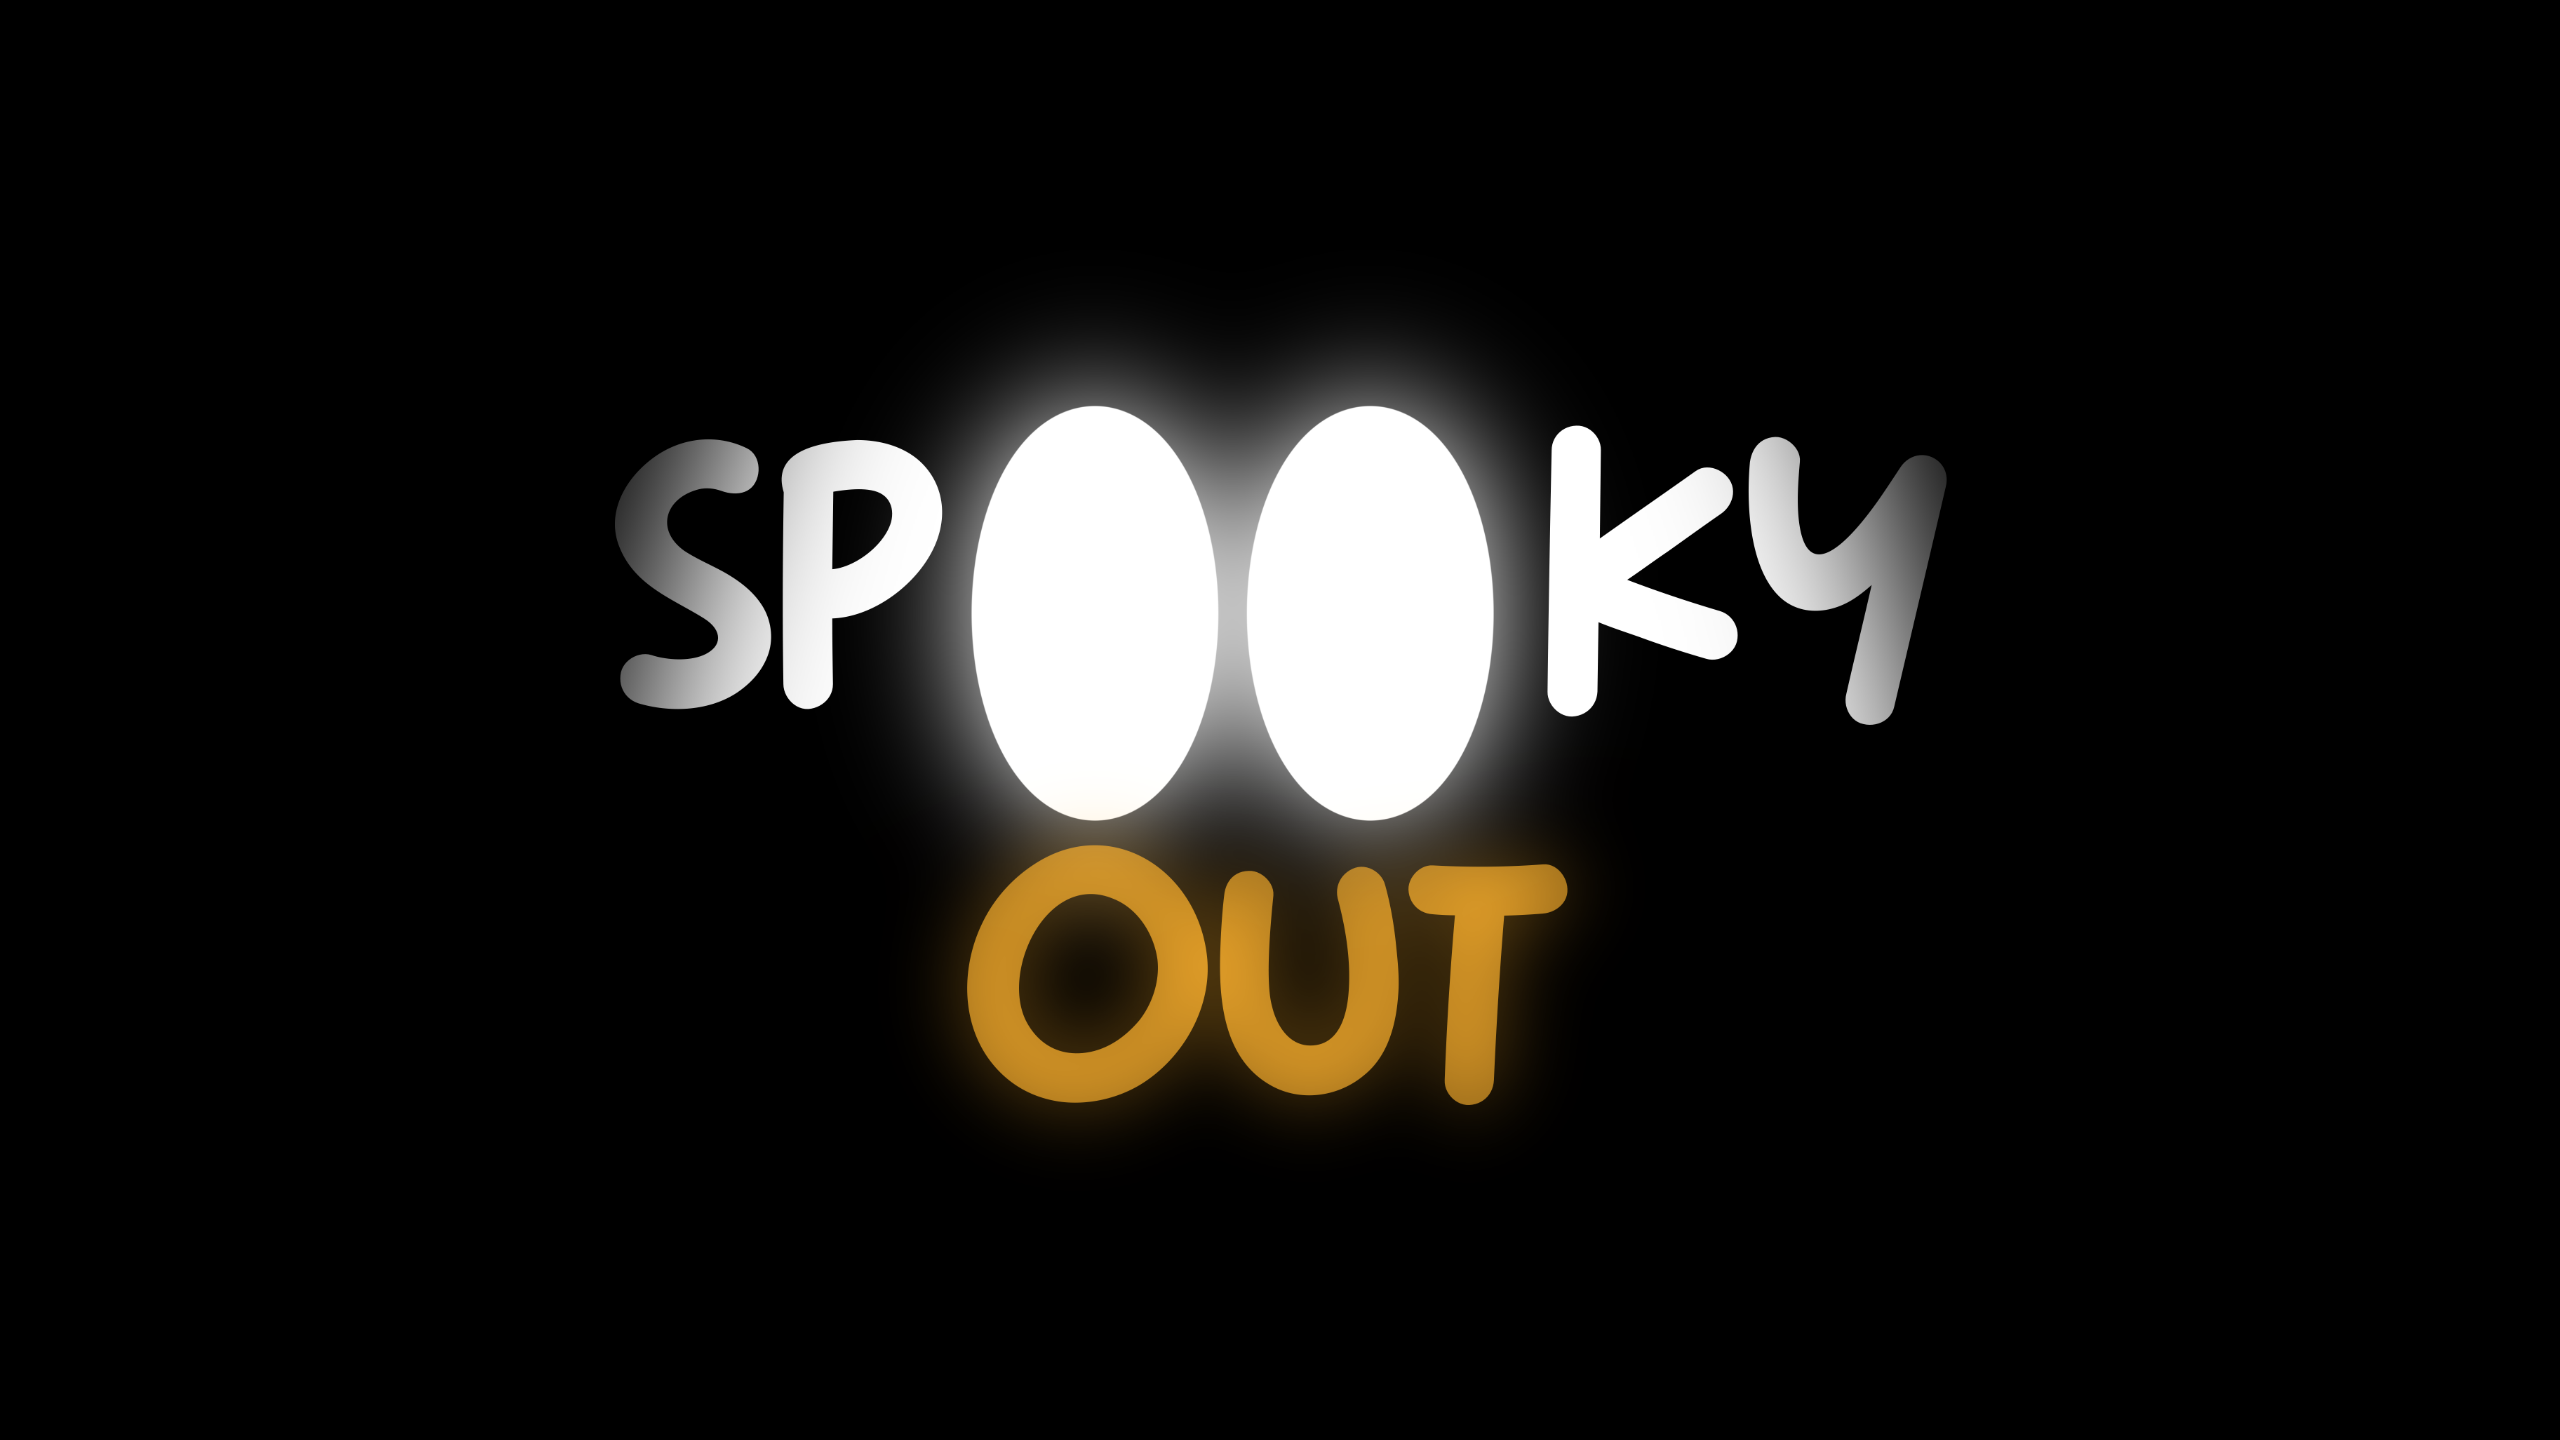 Spooky Out